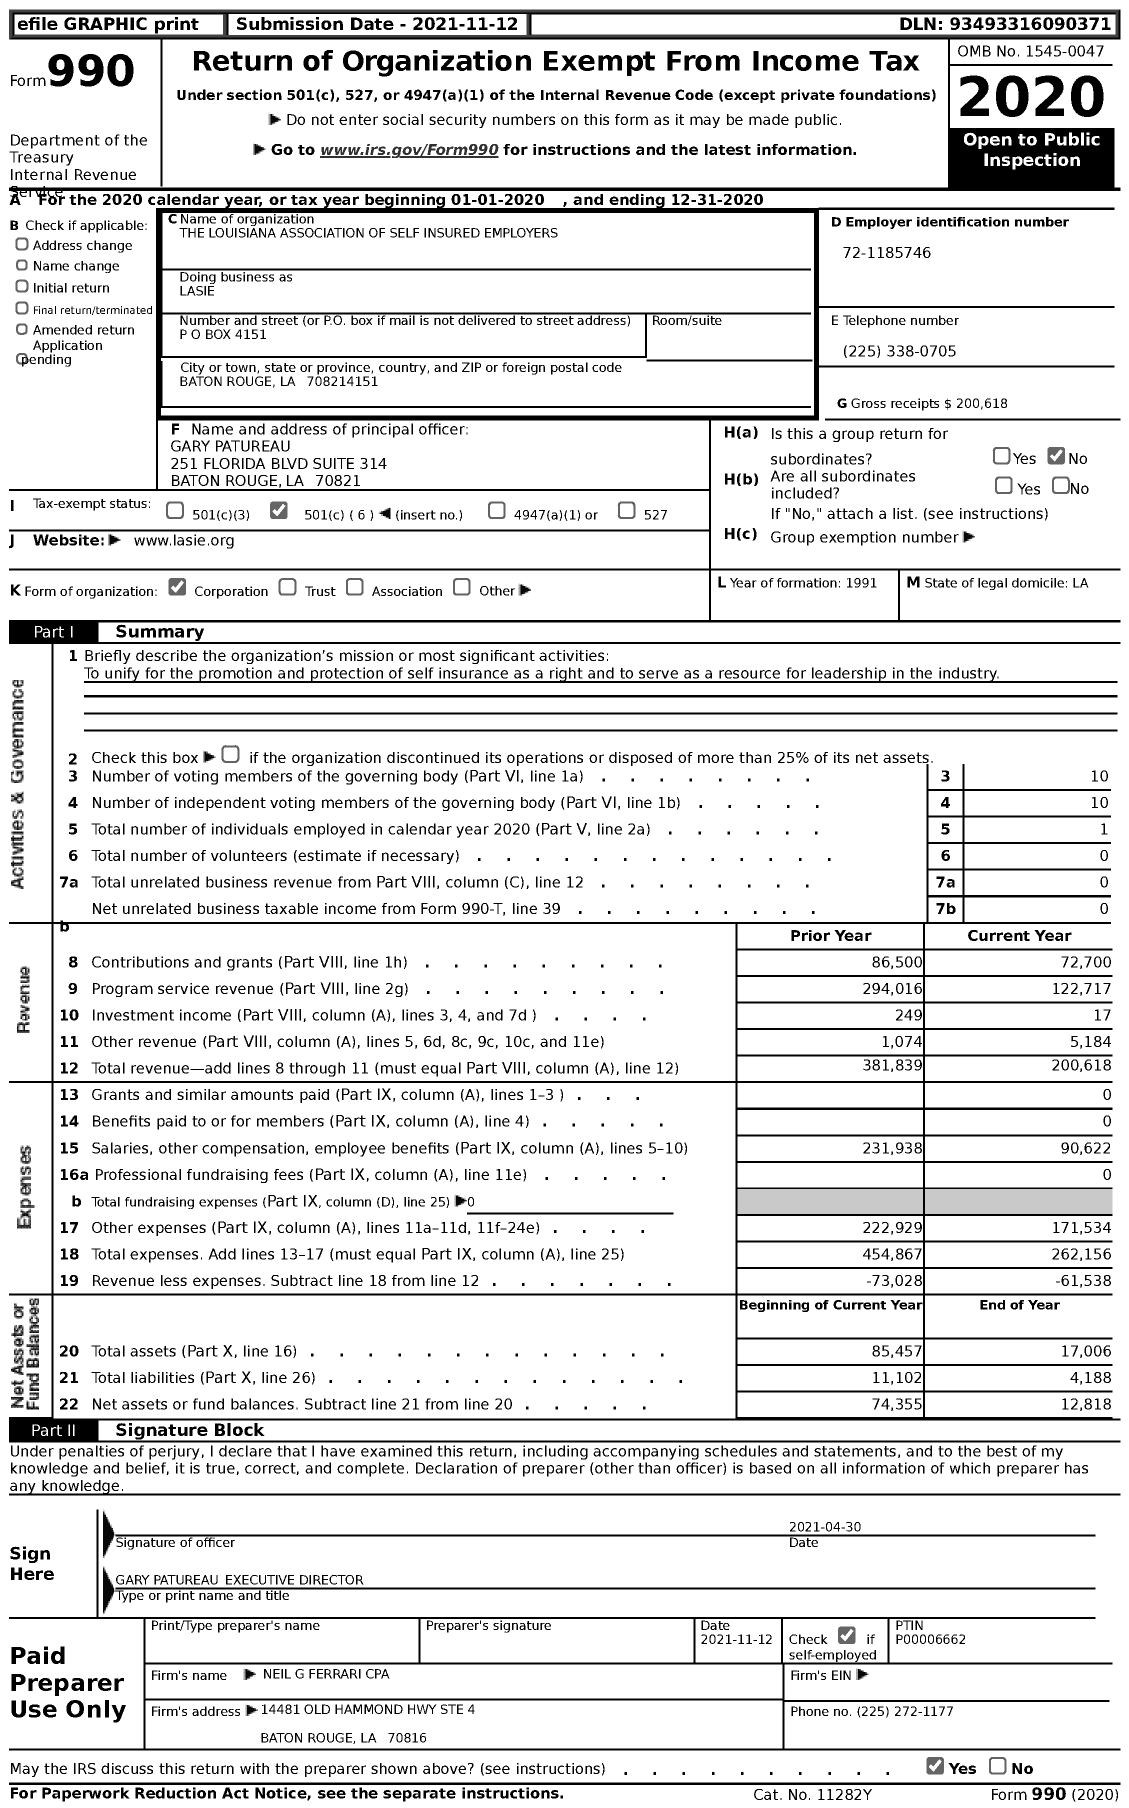 Image of first page of 2020 Form 990 for The Louisiana Association of Self Insured Employers (LASIE)